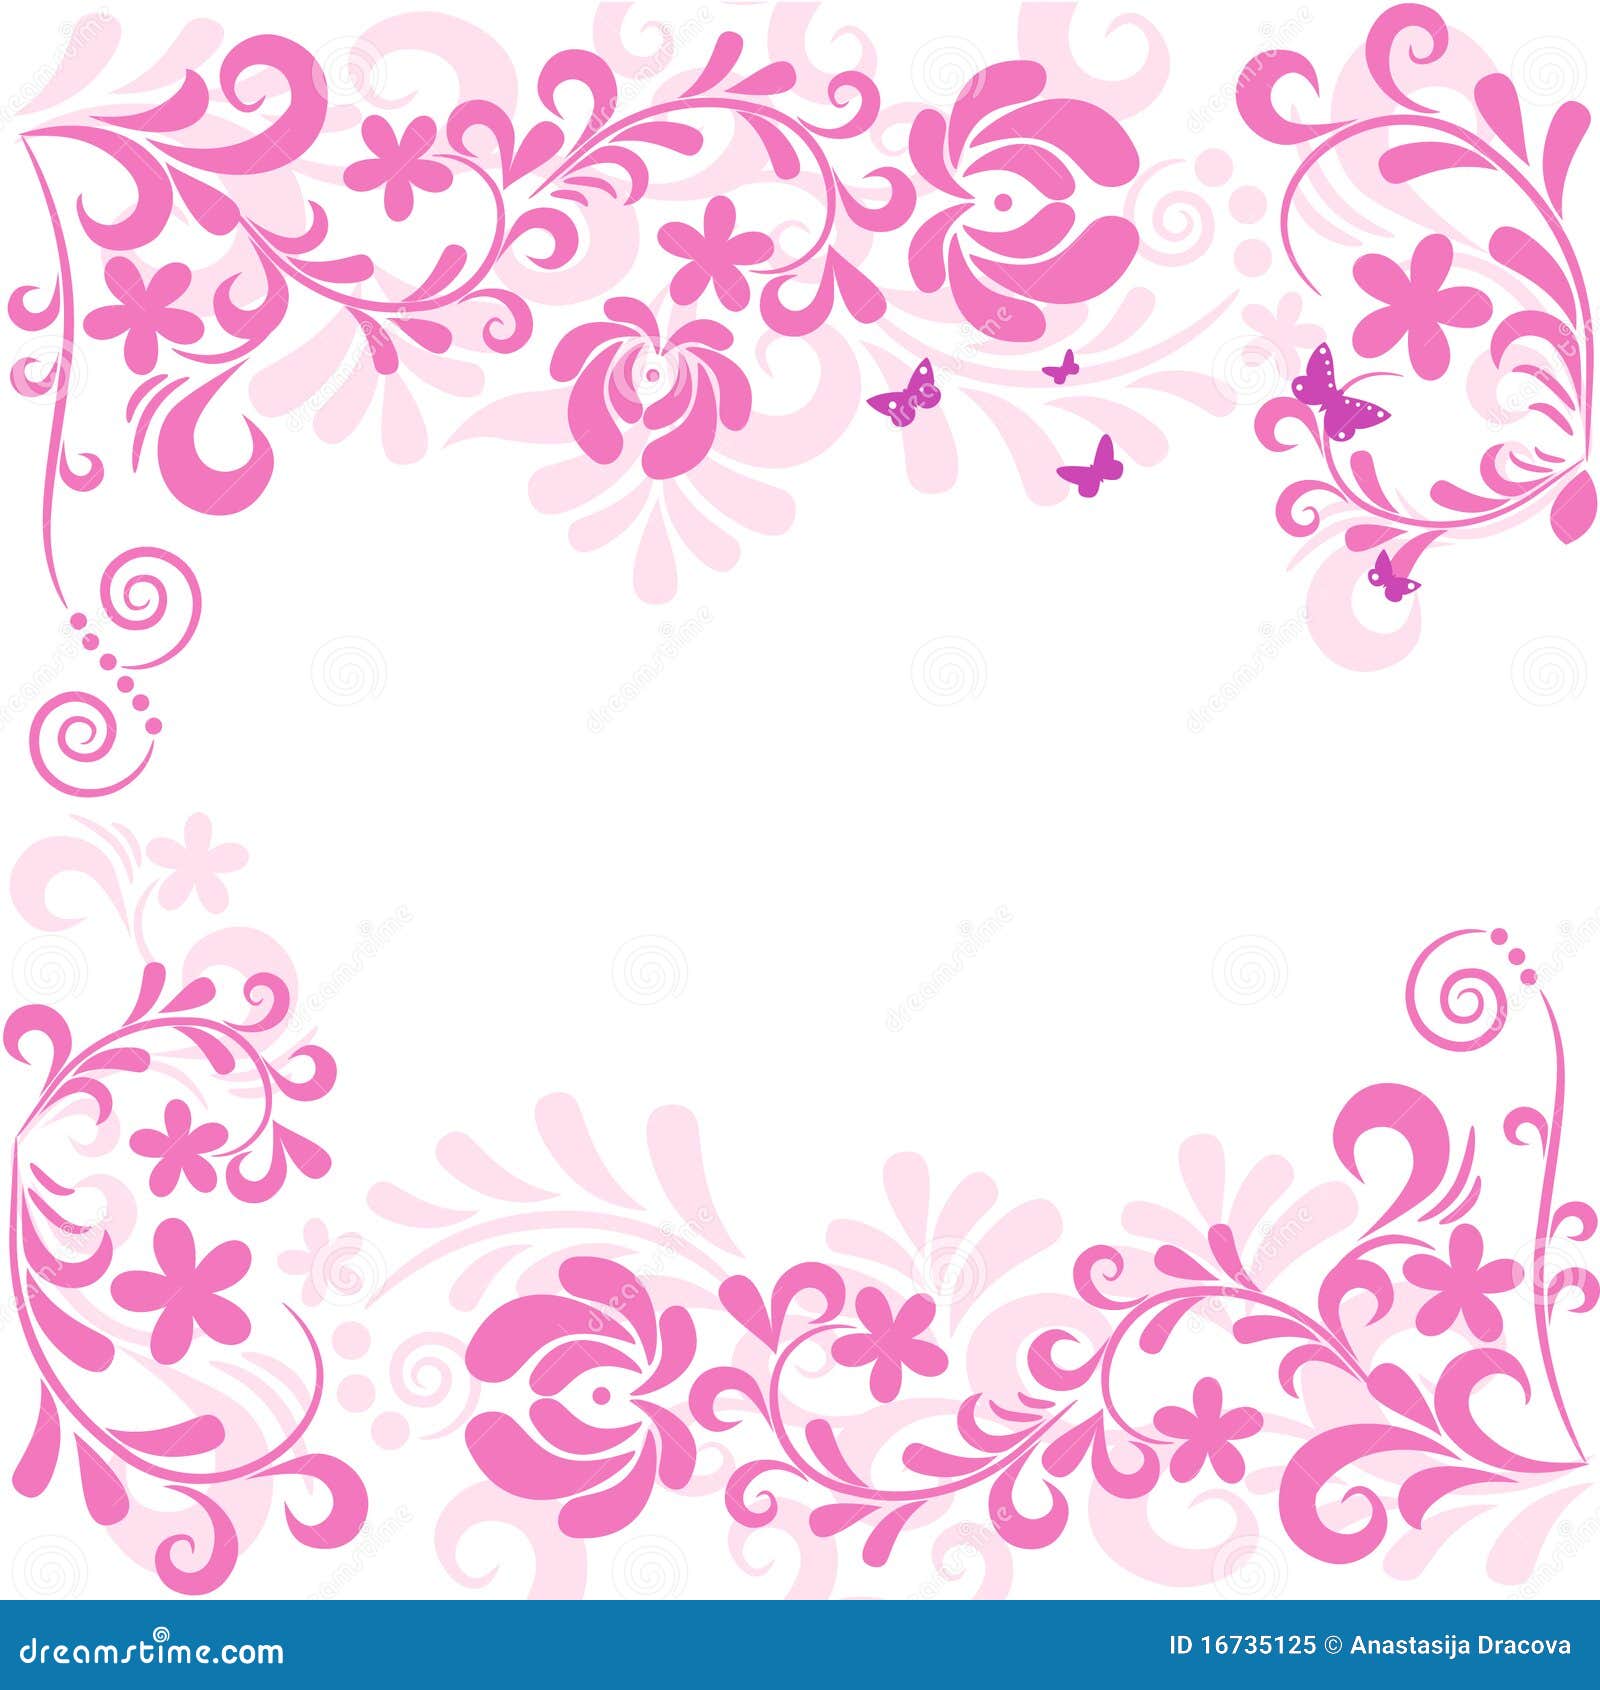 Soft Classic Floral Background Stock Vector - Illustration of spring